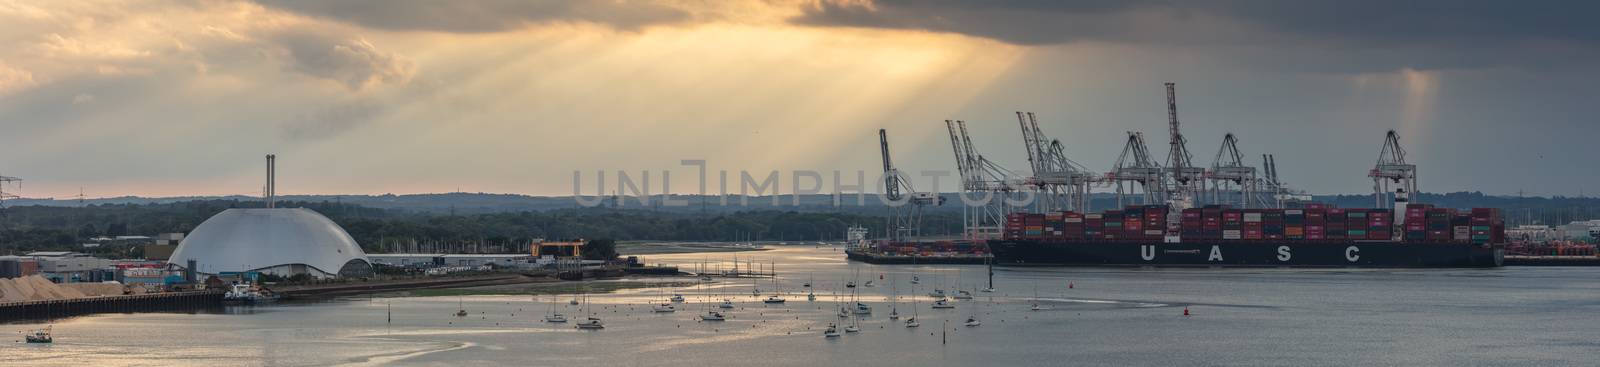 Aerial panoramic view of Southampton port at sunset. by DamantisZ